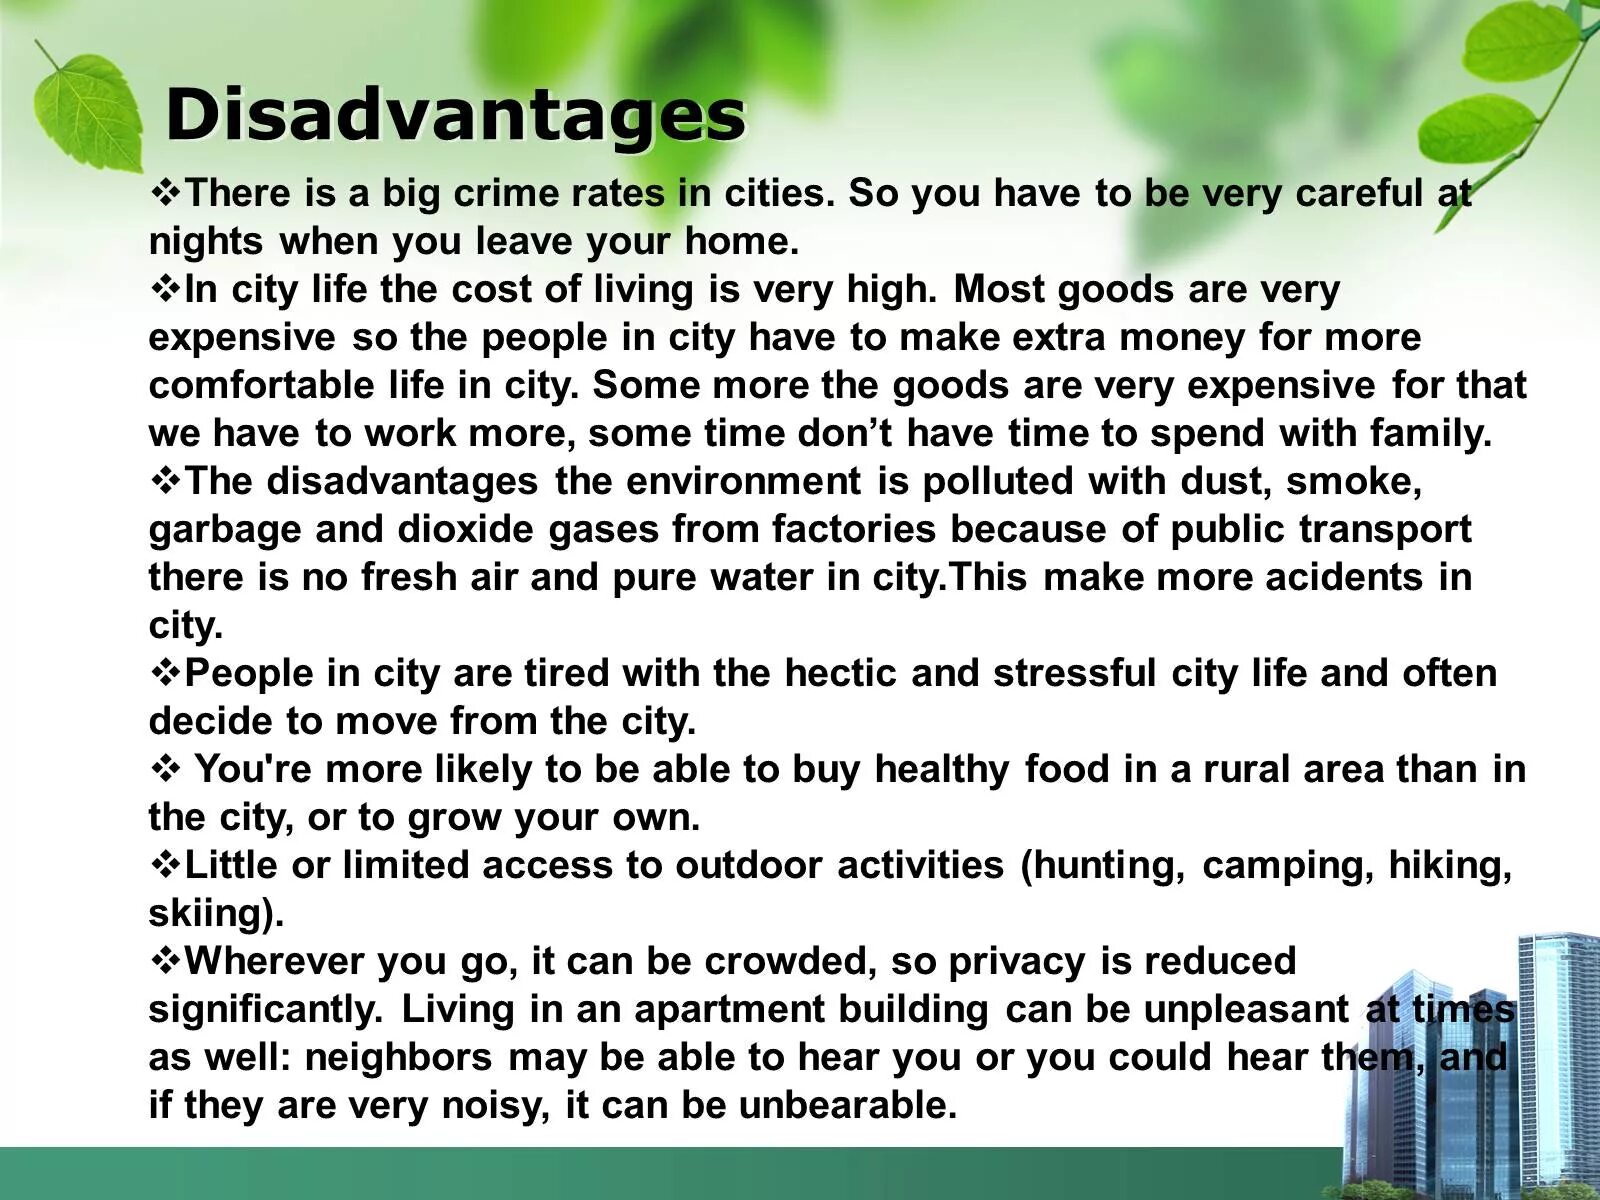 City Life advantages and disadvantages. Темы для эссе по английскому advantages and disadvantages. Темы эссе advantages and disadvantages. Disadvantages of Living in the City. Many day текст